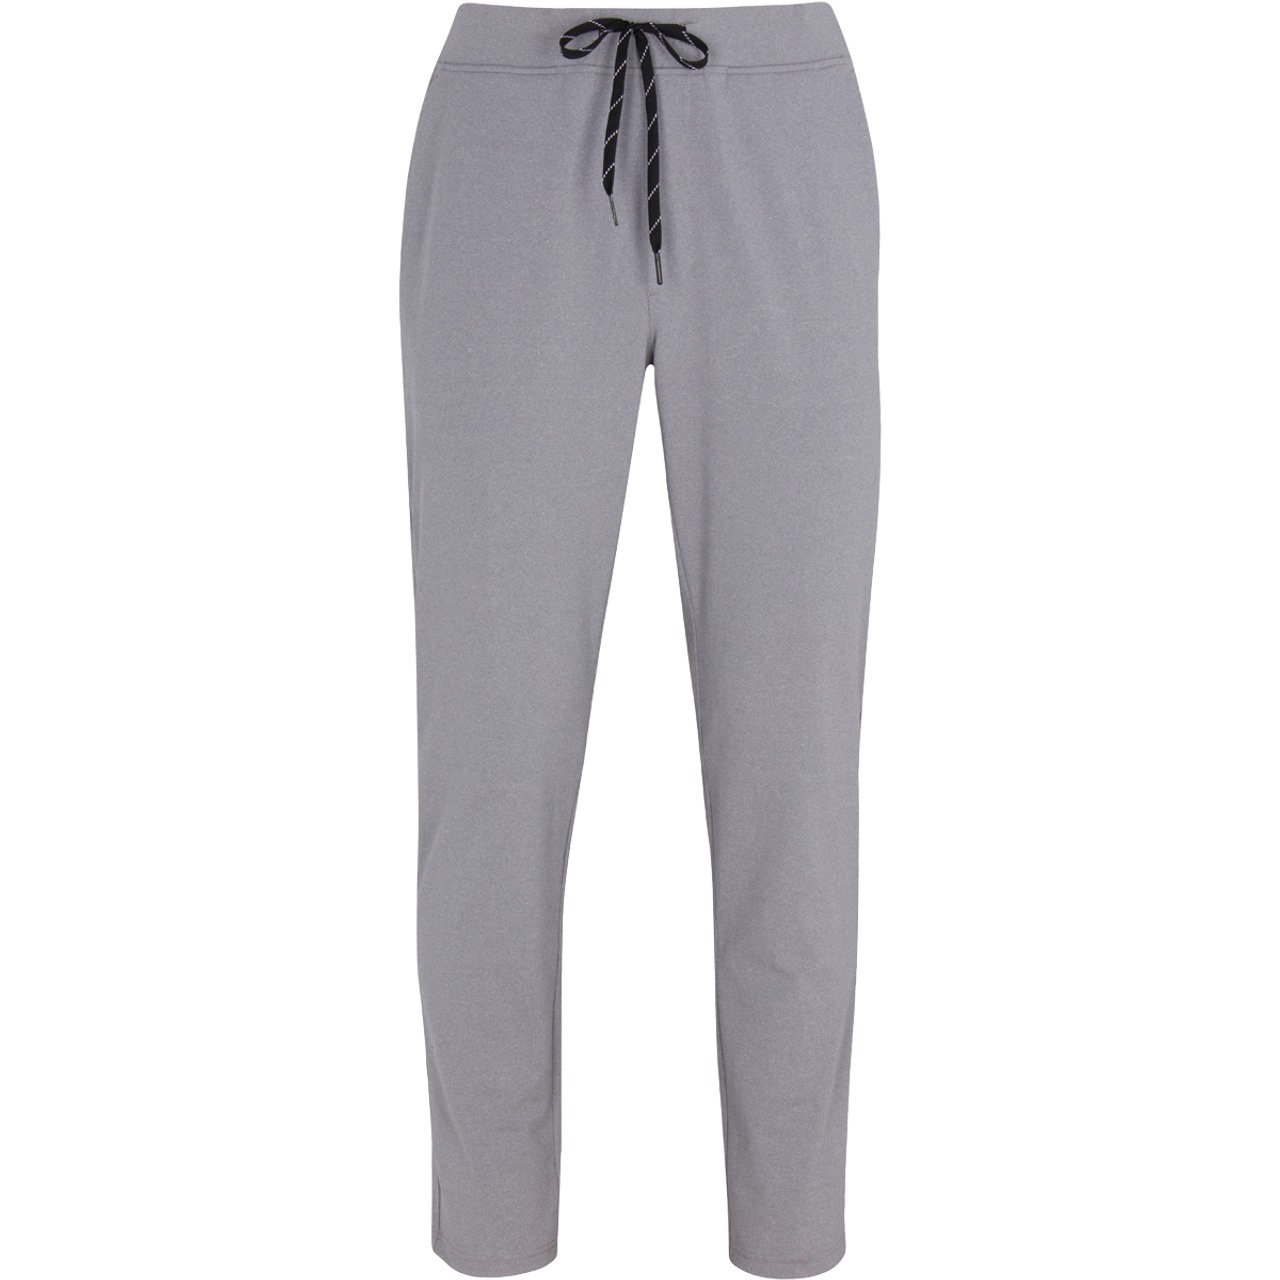 Kelso Knit Performance Pant - Dunning